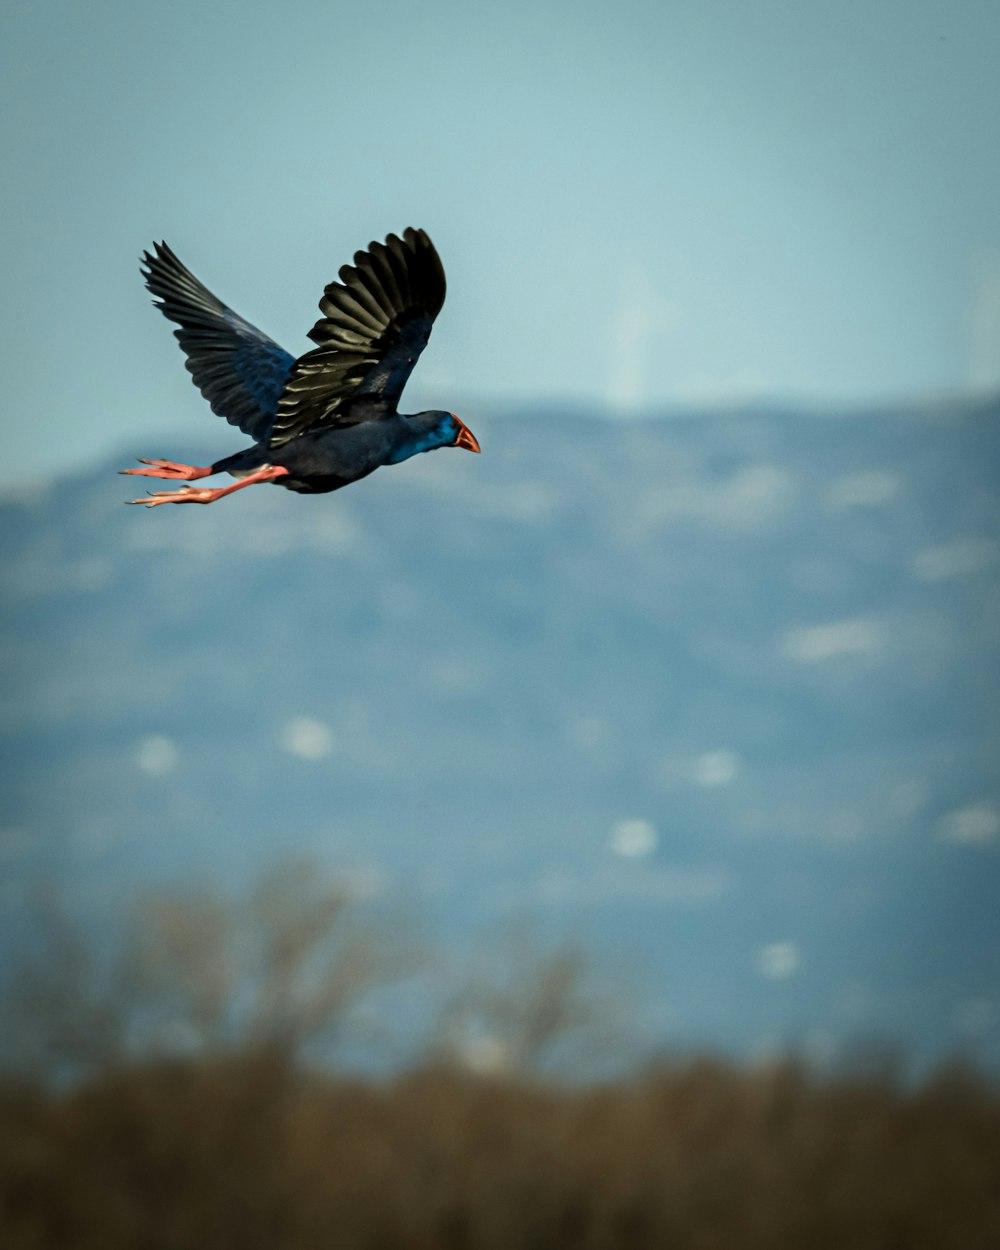 a bird is flying in the air with a mountain in the background